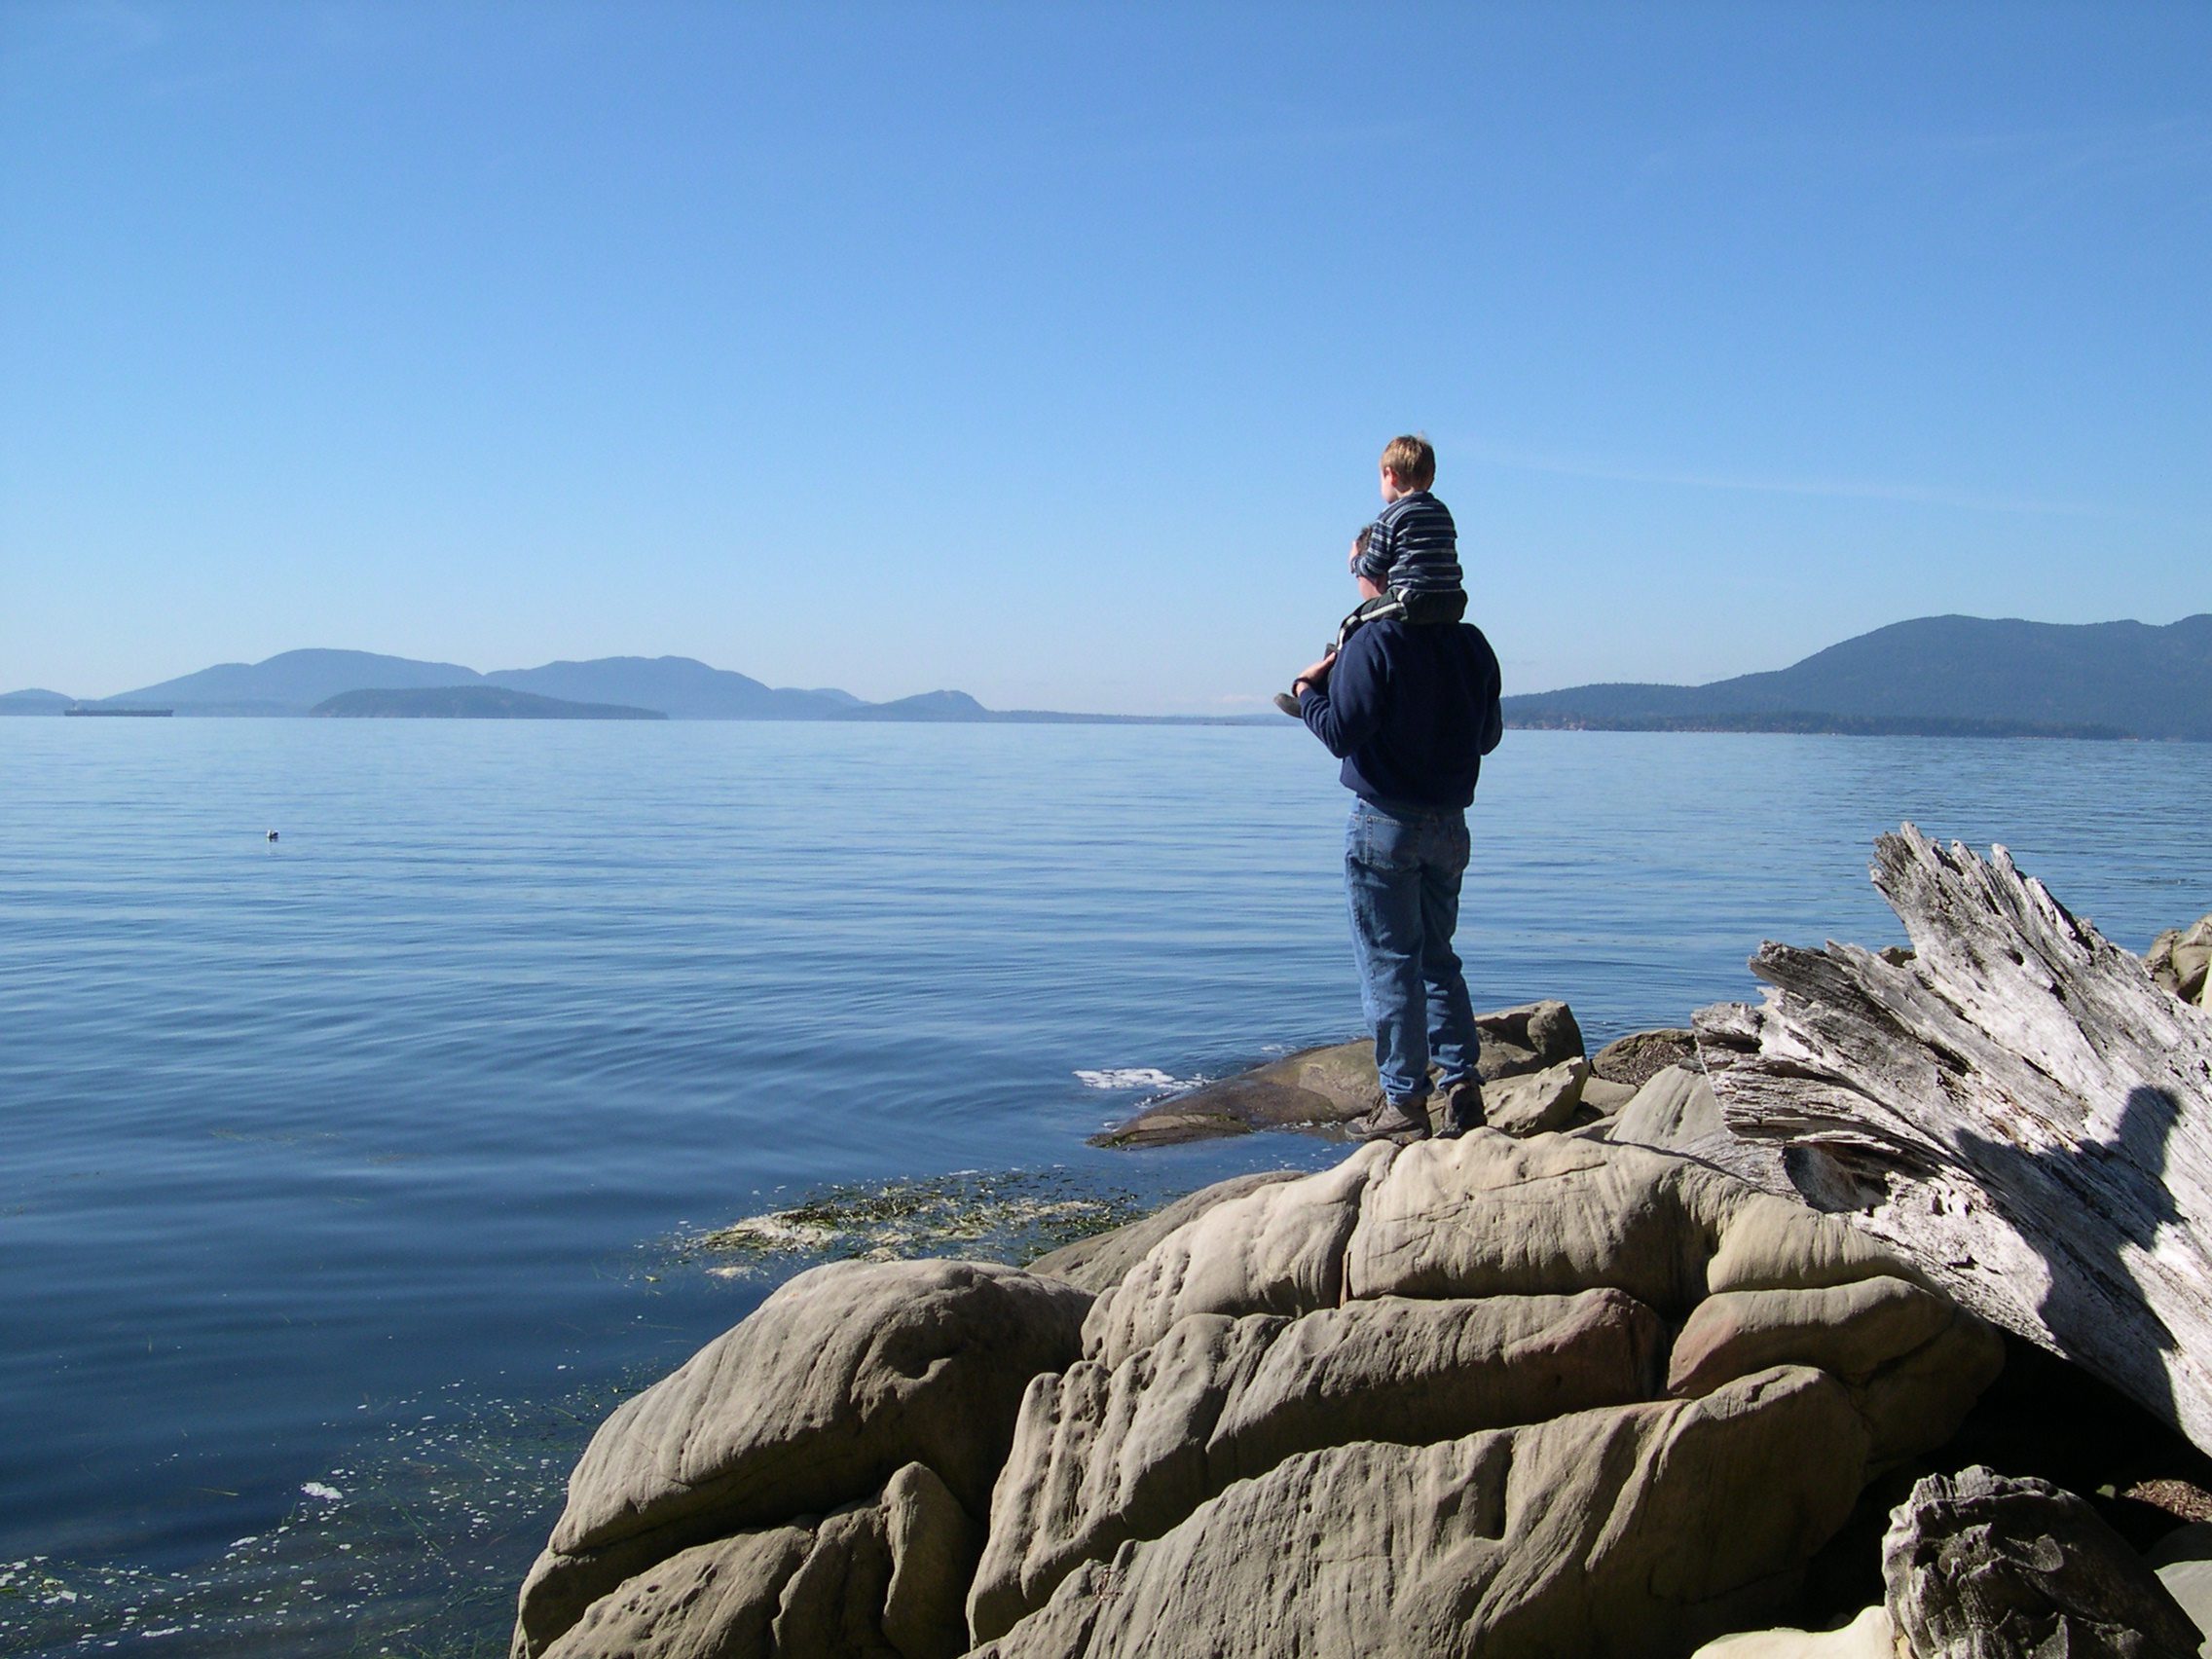 Adult with child on their shoulders standing on a rock looking out into Bellingham Bay.